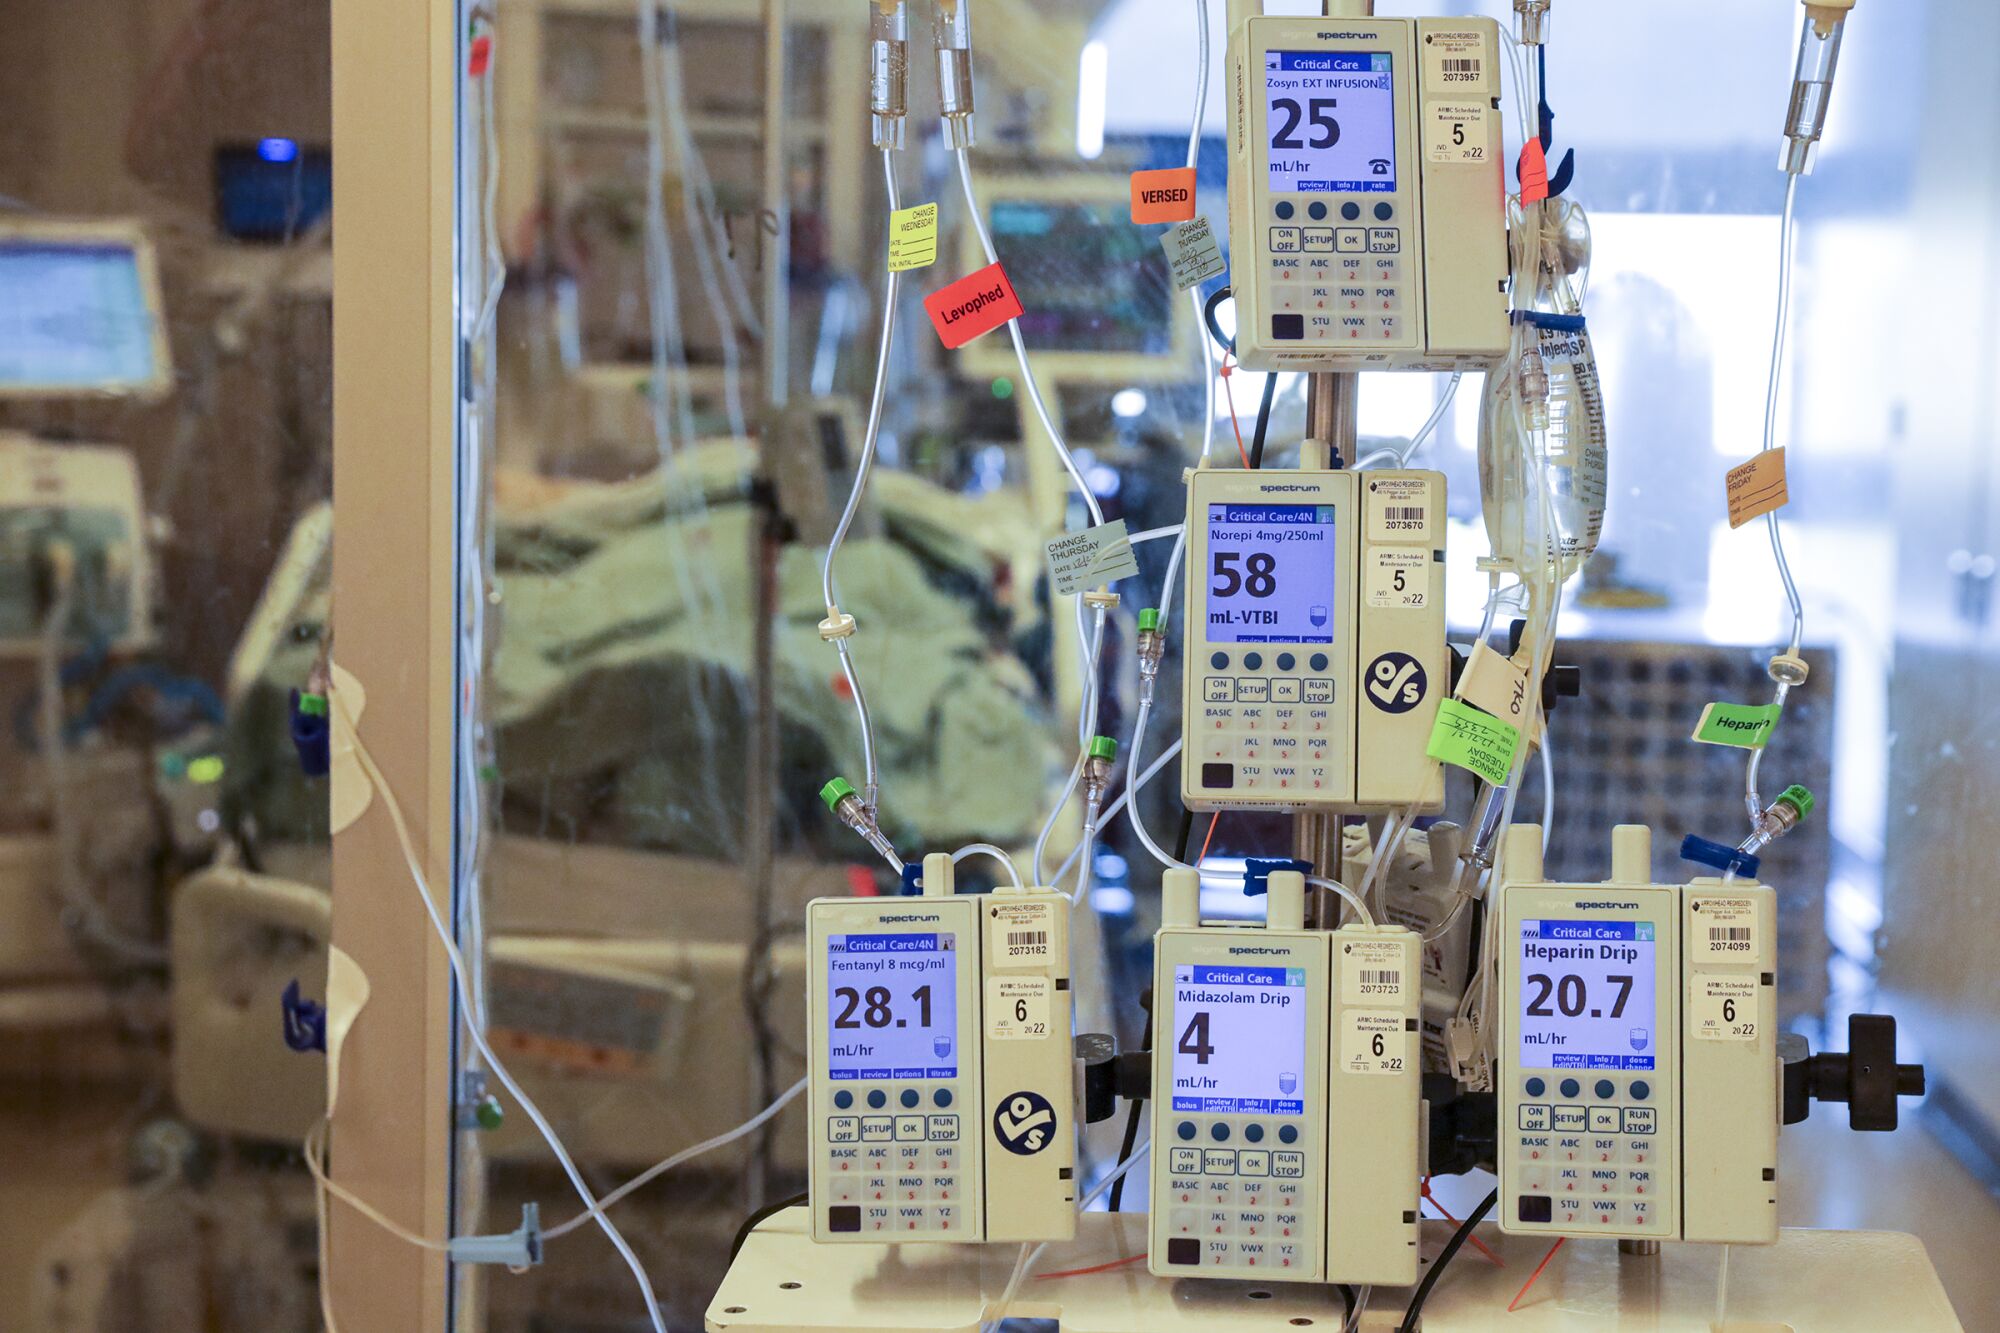 Intravenous pumps deliver medications to a COVID patient being treated in an ICU at Arrowhead Regional Medical Center.